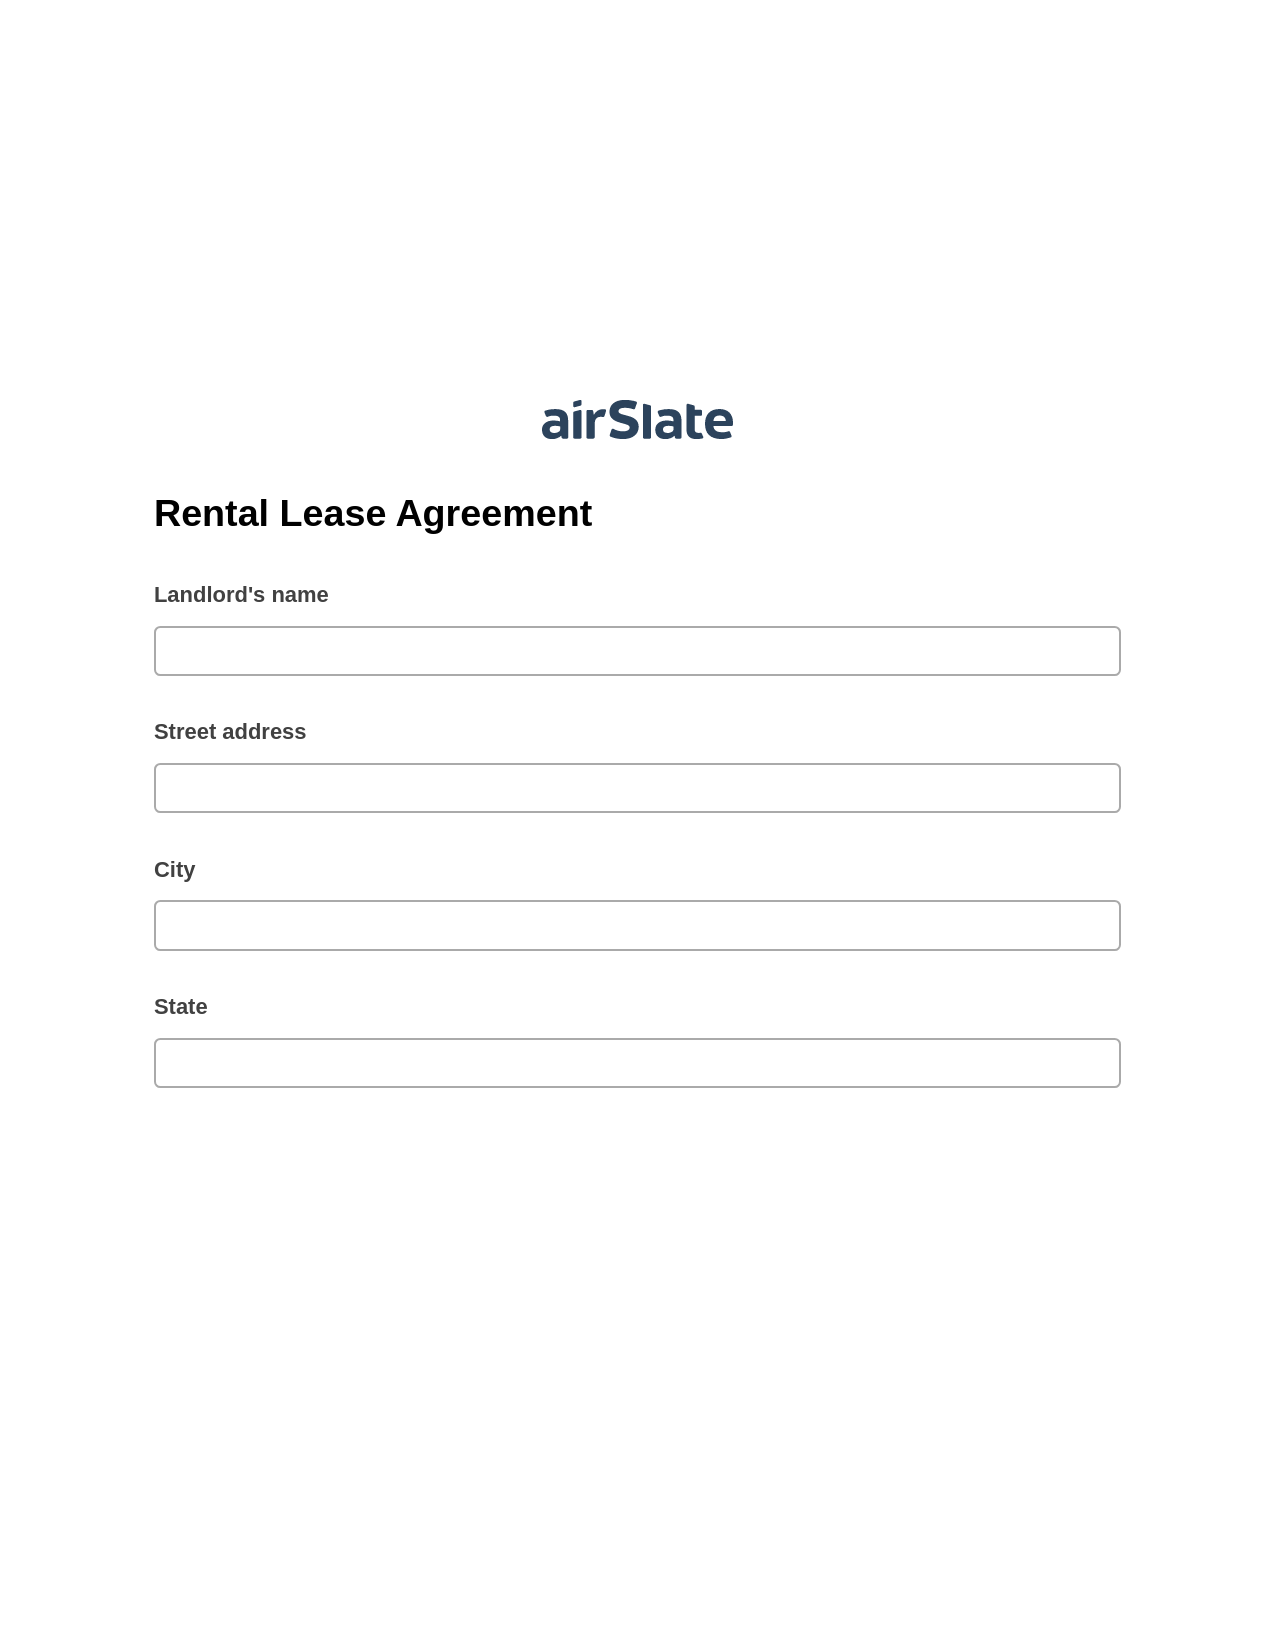 Rental Lease Agreement Pre-fill from MySQL Dropdown Options Bot, Create slate from another Flow Bot, Slack Two-Way Binding Bot